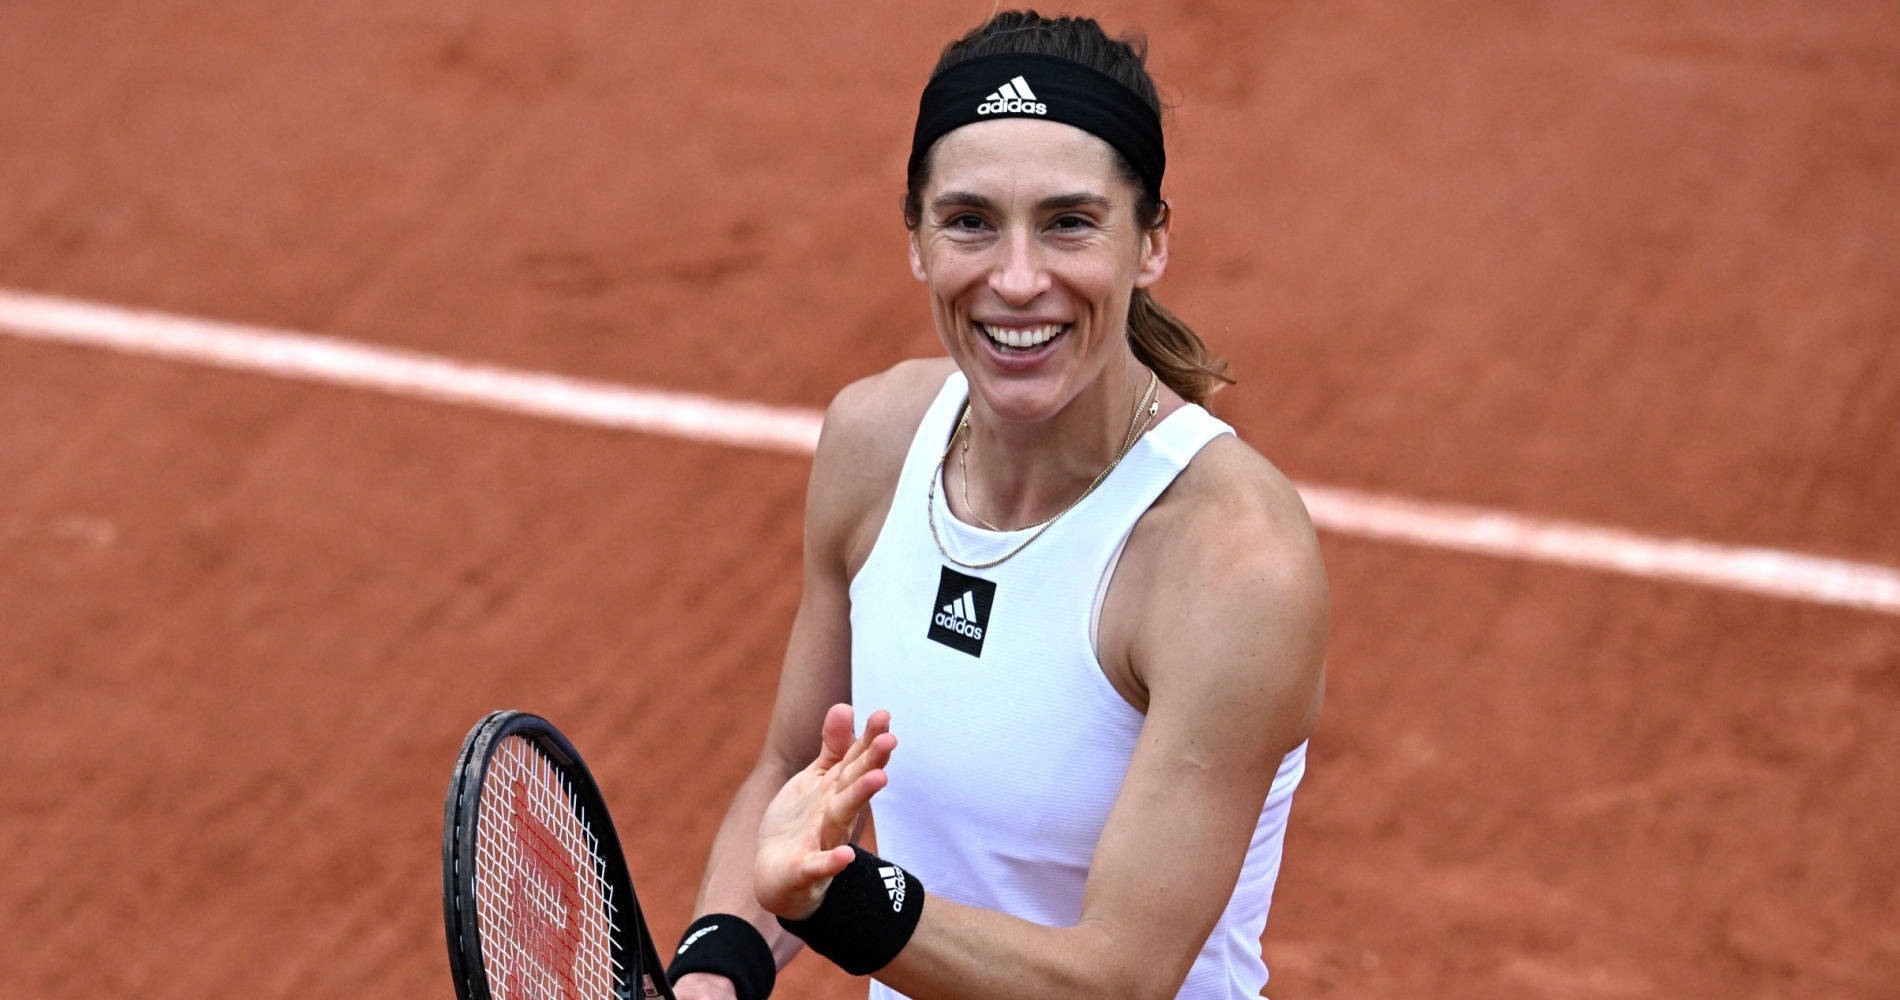 Former World Top 9 Tennis Player Andrea Petkovic Wallpaper